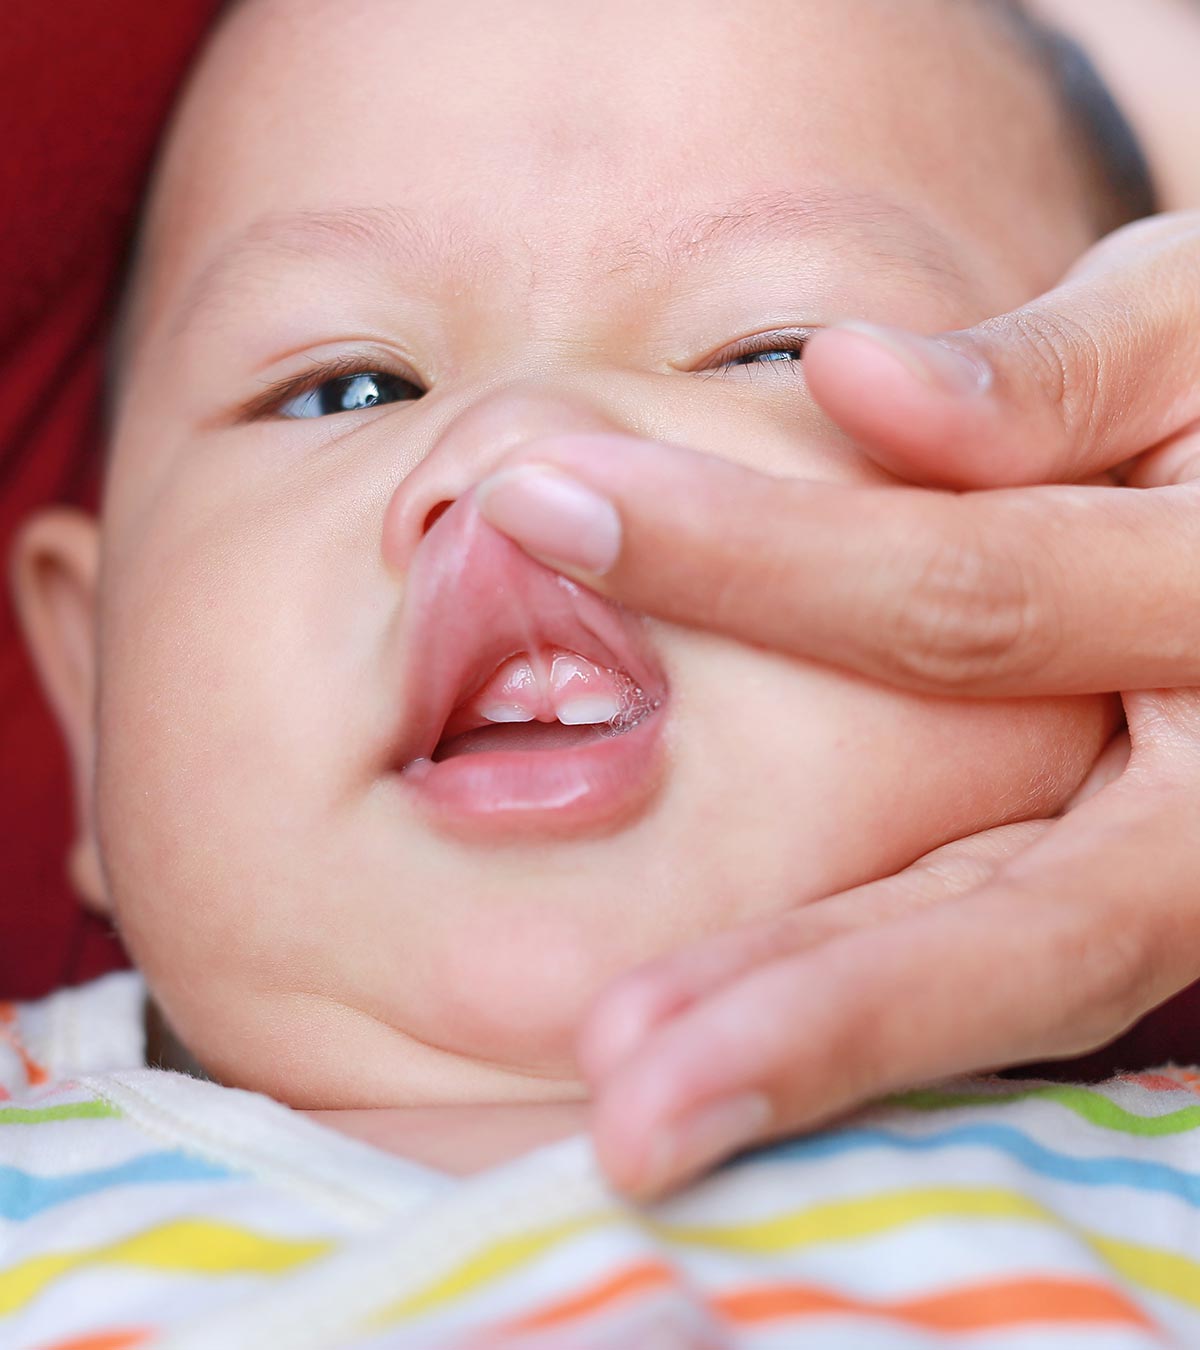 Lip Tie In Babies: Causes, Signs, Complications & Treatment